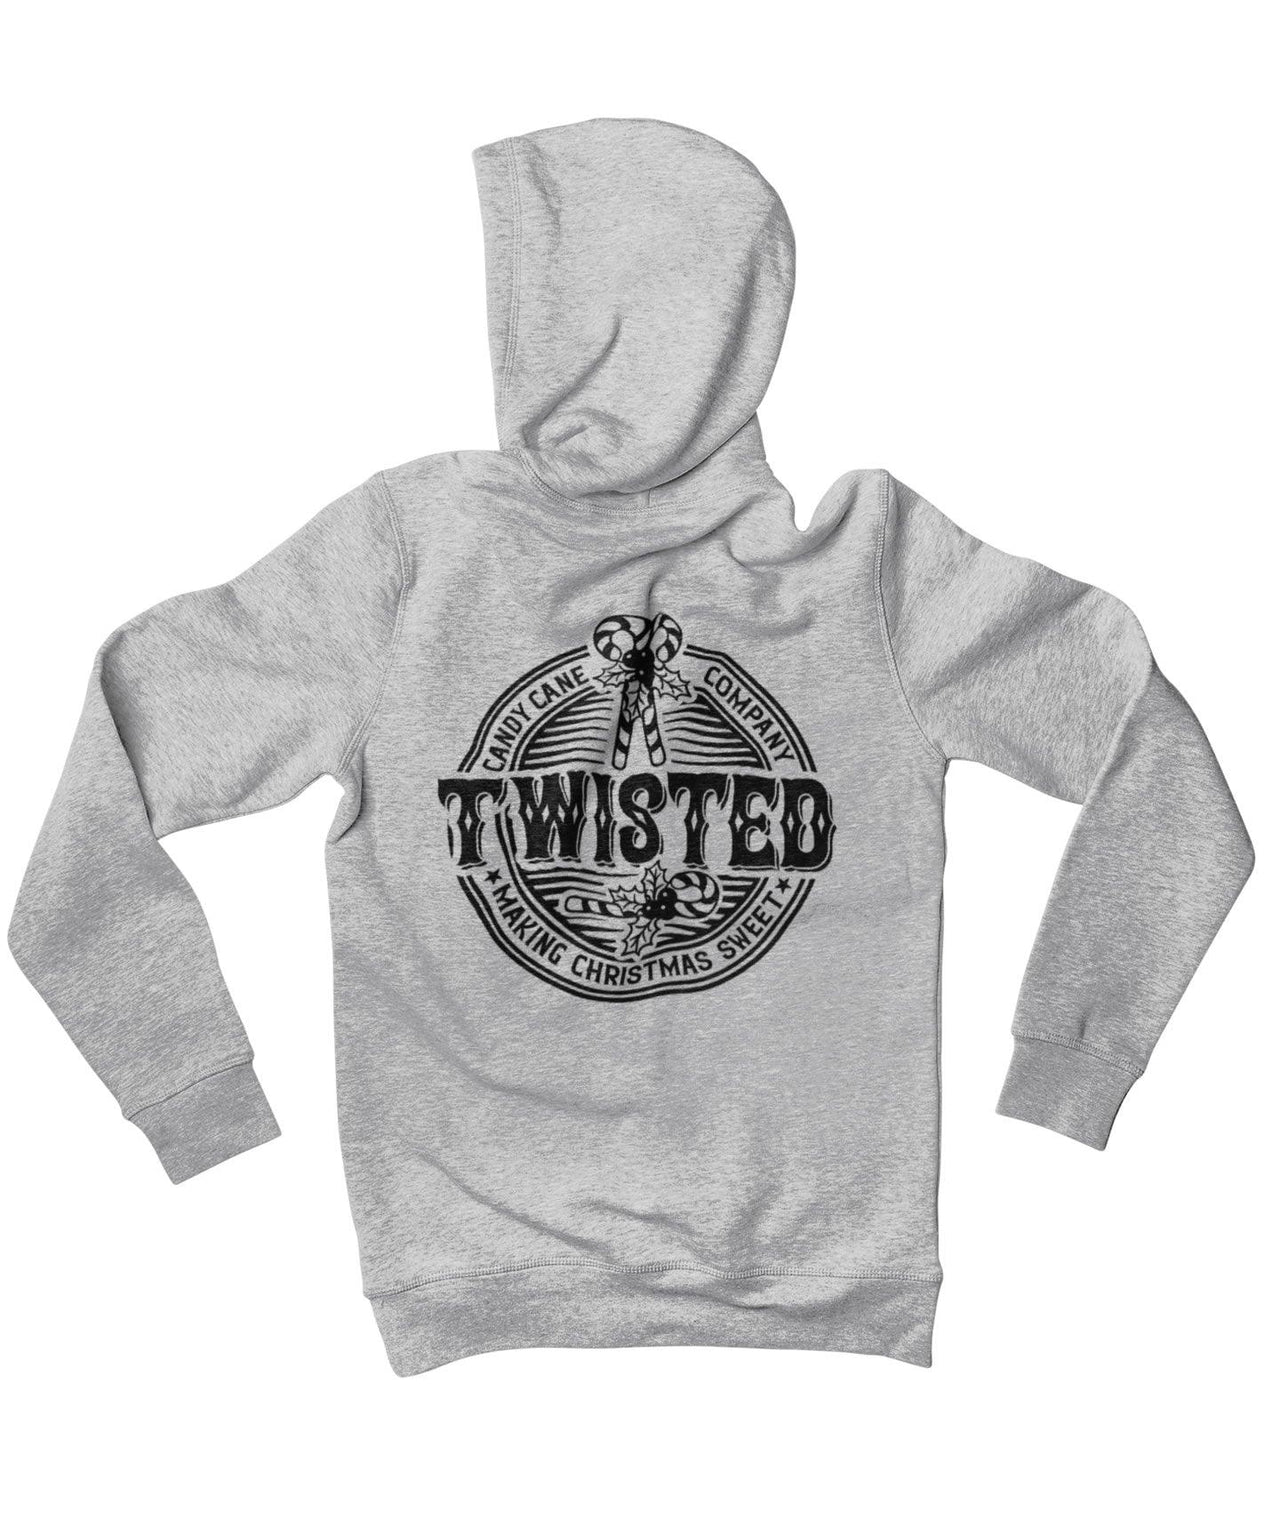 Twisted Candy Cane Mono-Colour Back Printed Christmas Unisex Hoodie 8Ball